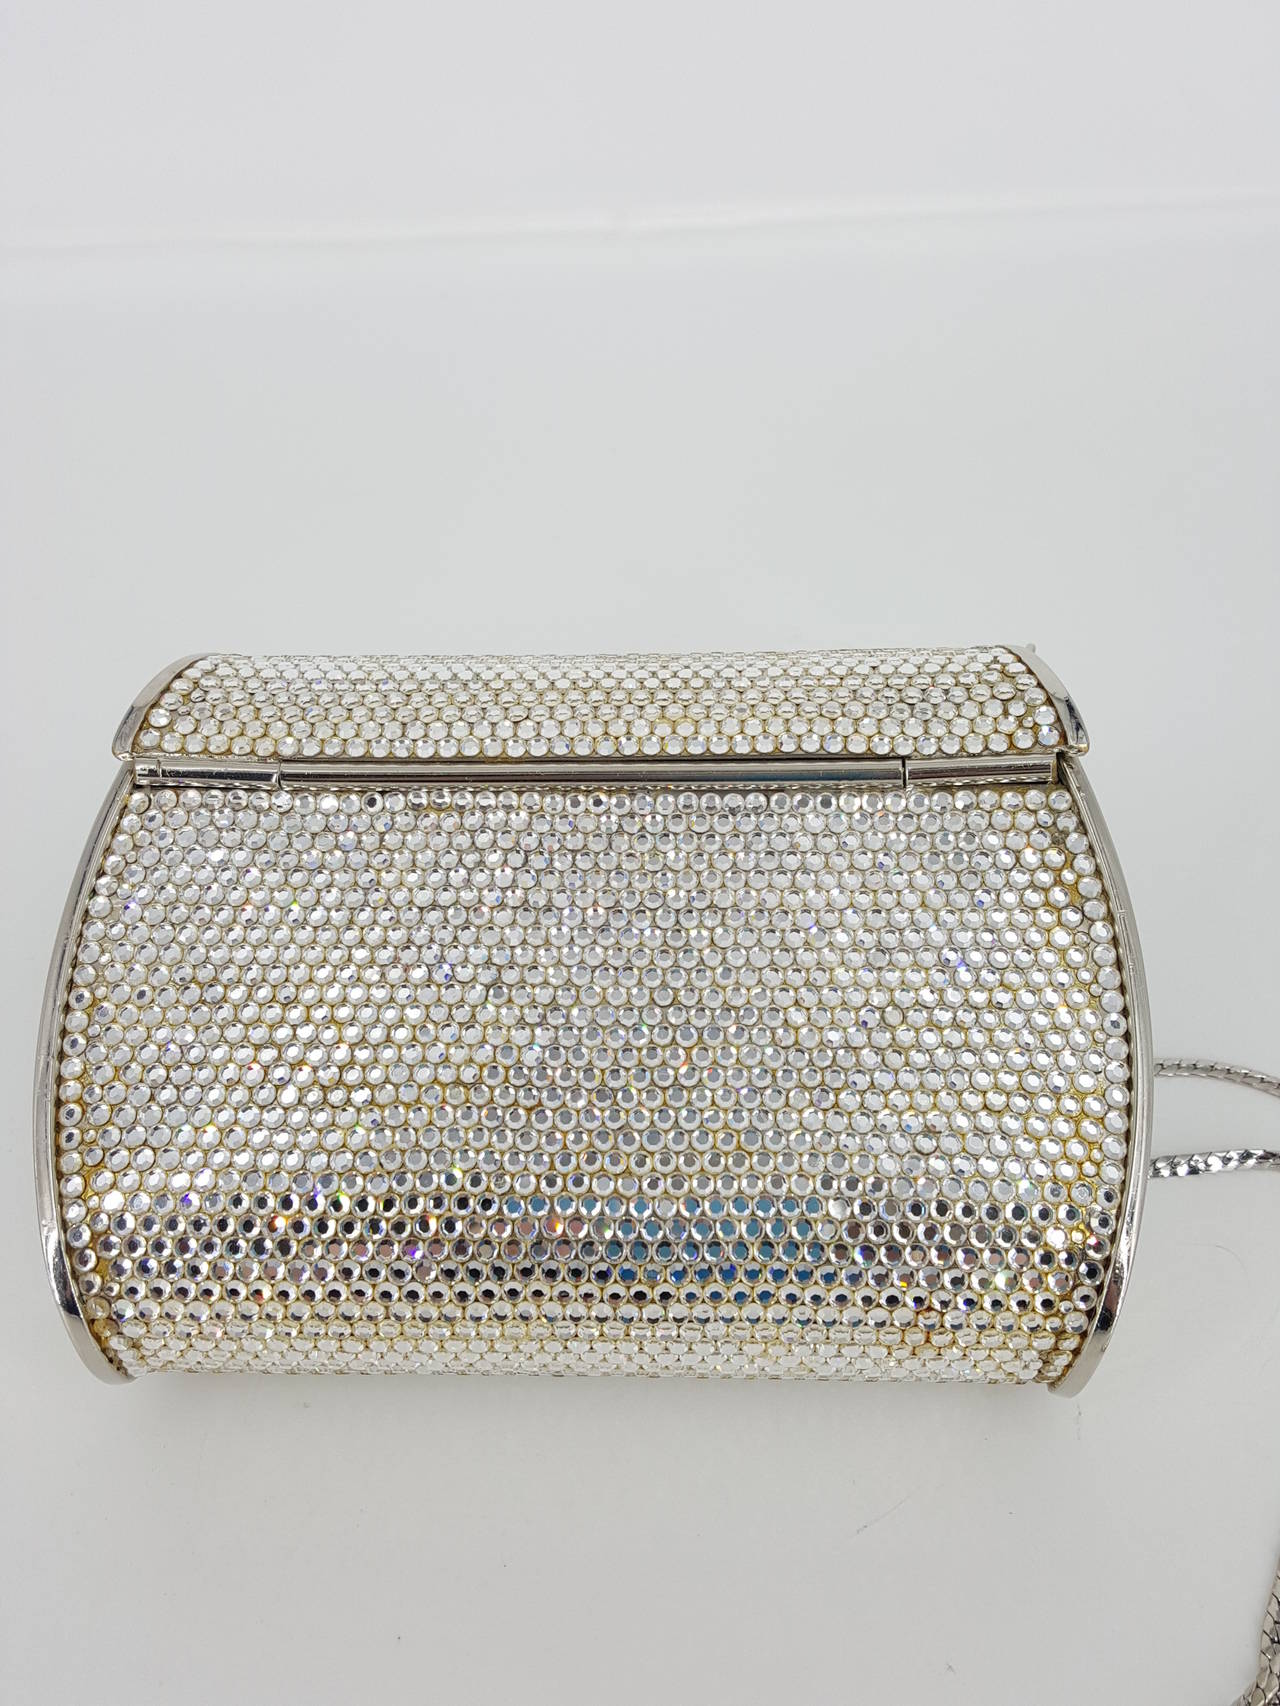 Offered for sale is this lovely Judith Leiber evening bag or minaudiere.  It is completely covered with clear crystals and has silver hardware and 20